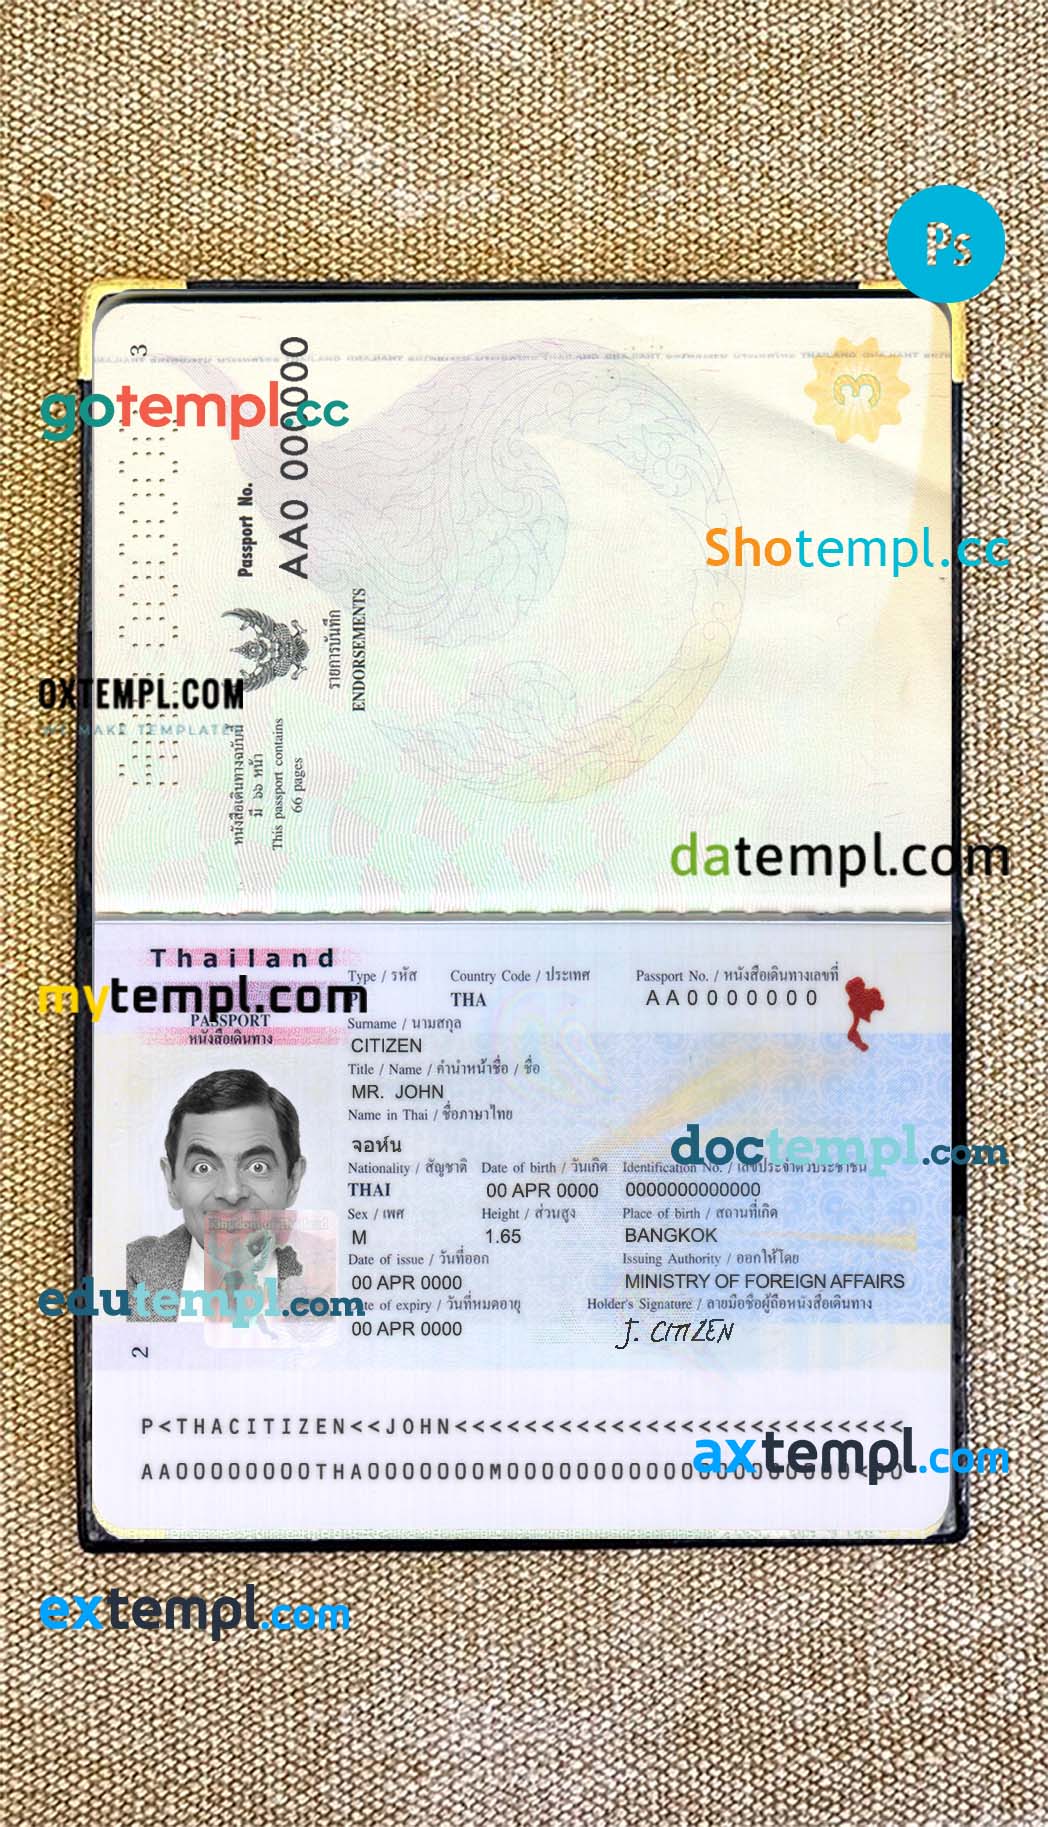 Haiti passport PSD files, scan and photograghed image, 2 in 1